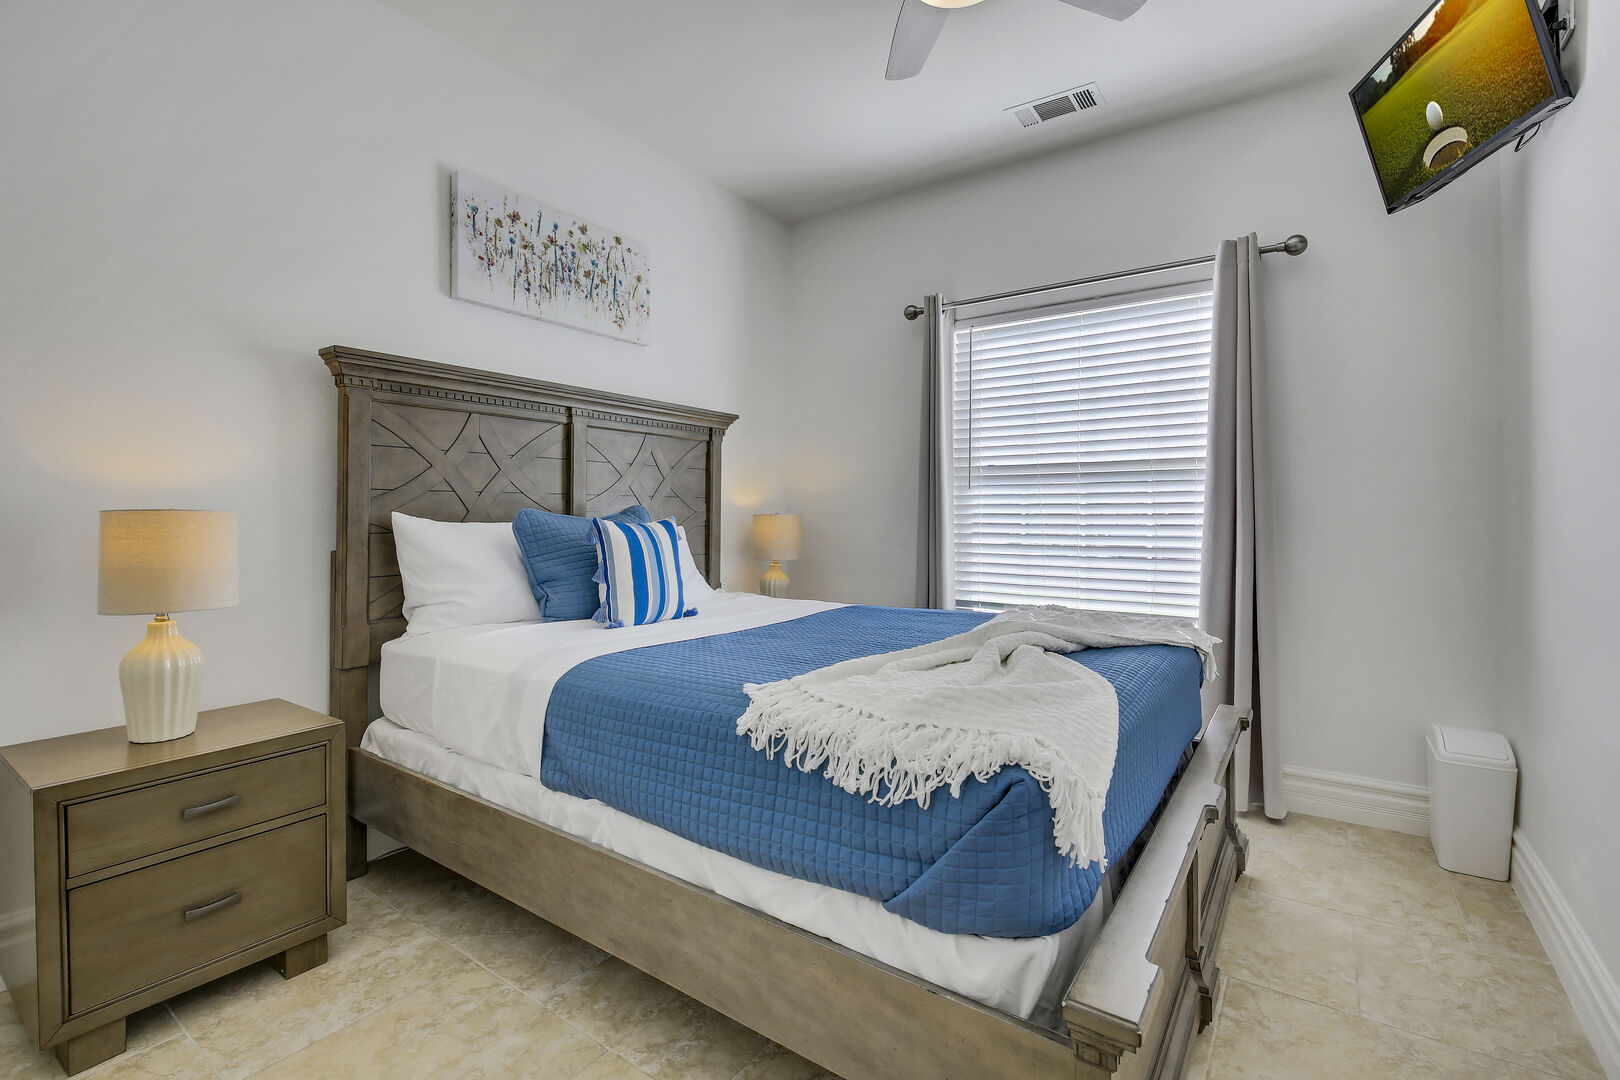 Bedroom 4 is located across the hallway bathroom and features a Queen-sized Bed, 32-inch Insignia Smart television, remote-controlled ceiling fan, and reach-in closet.